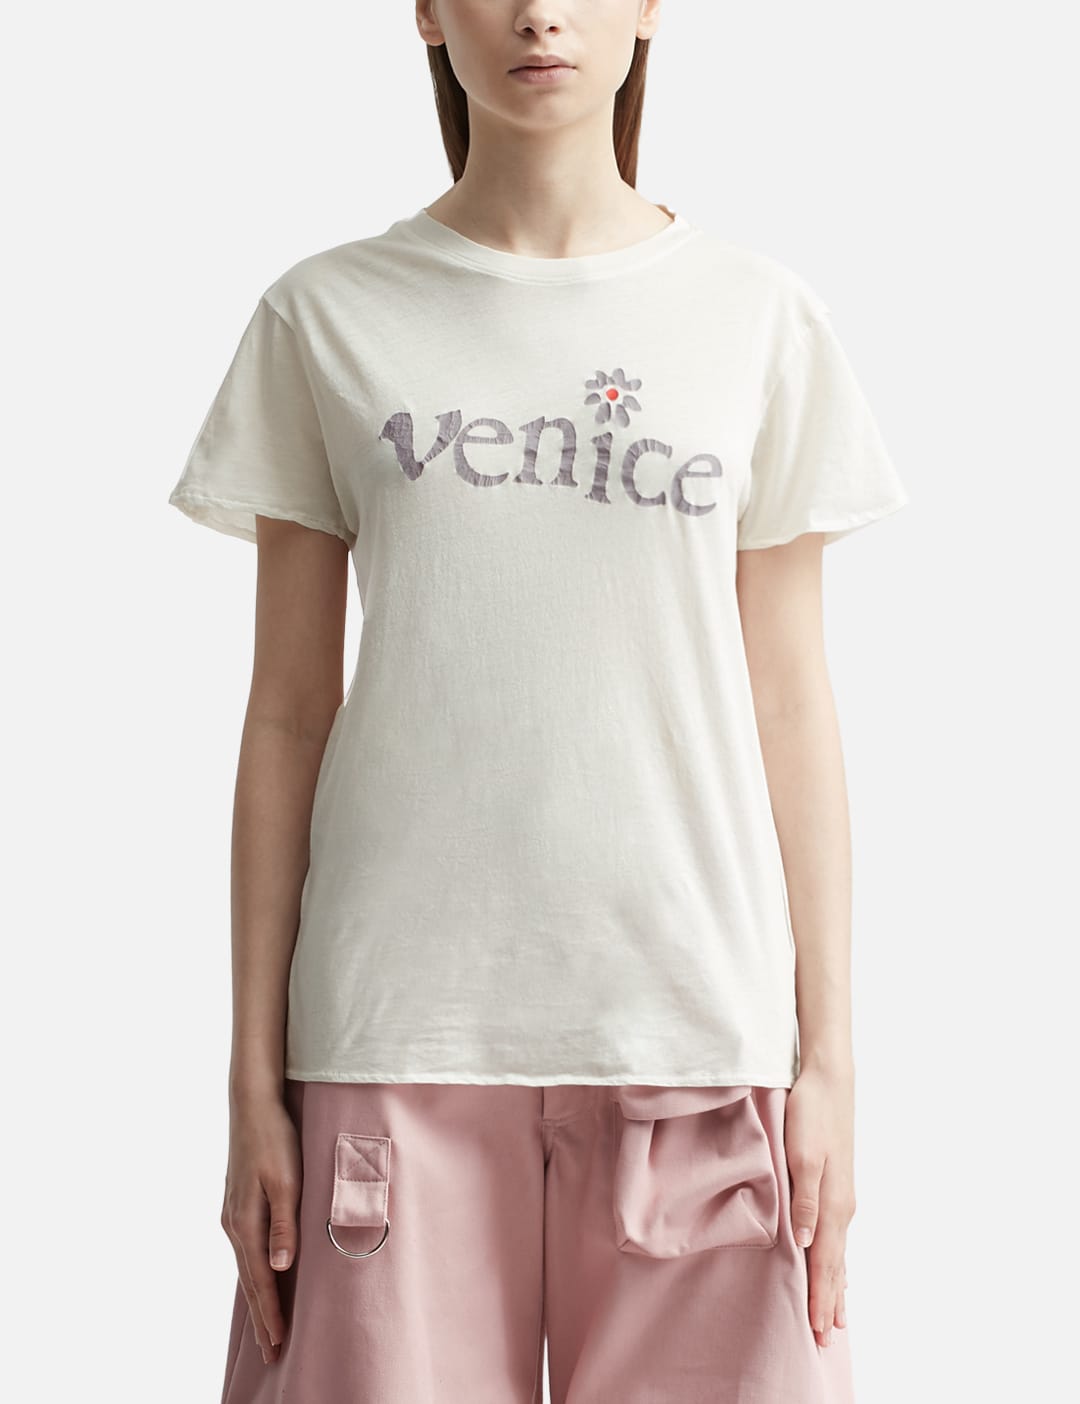 ERL - Unisex Venice T-shirt | HBX - Globally Curated Fashion and